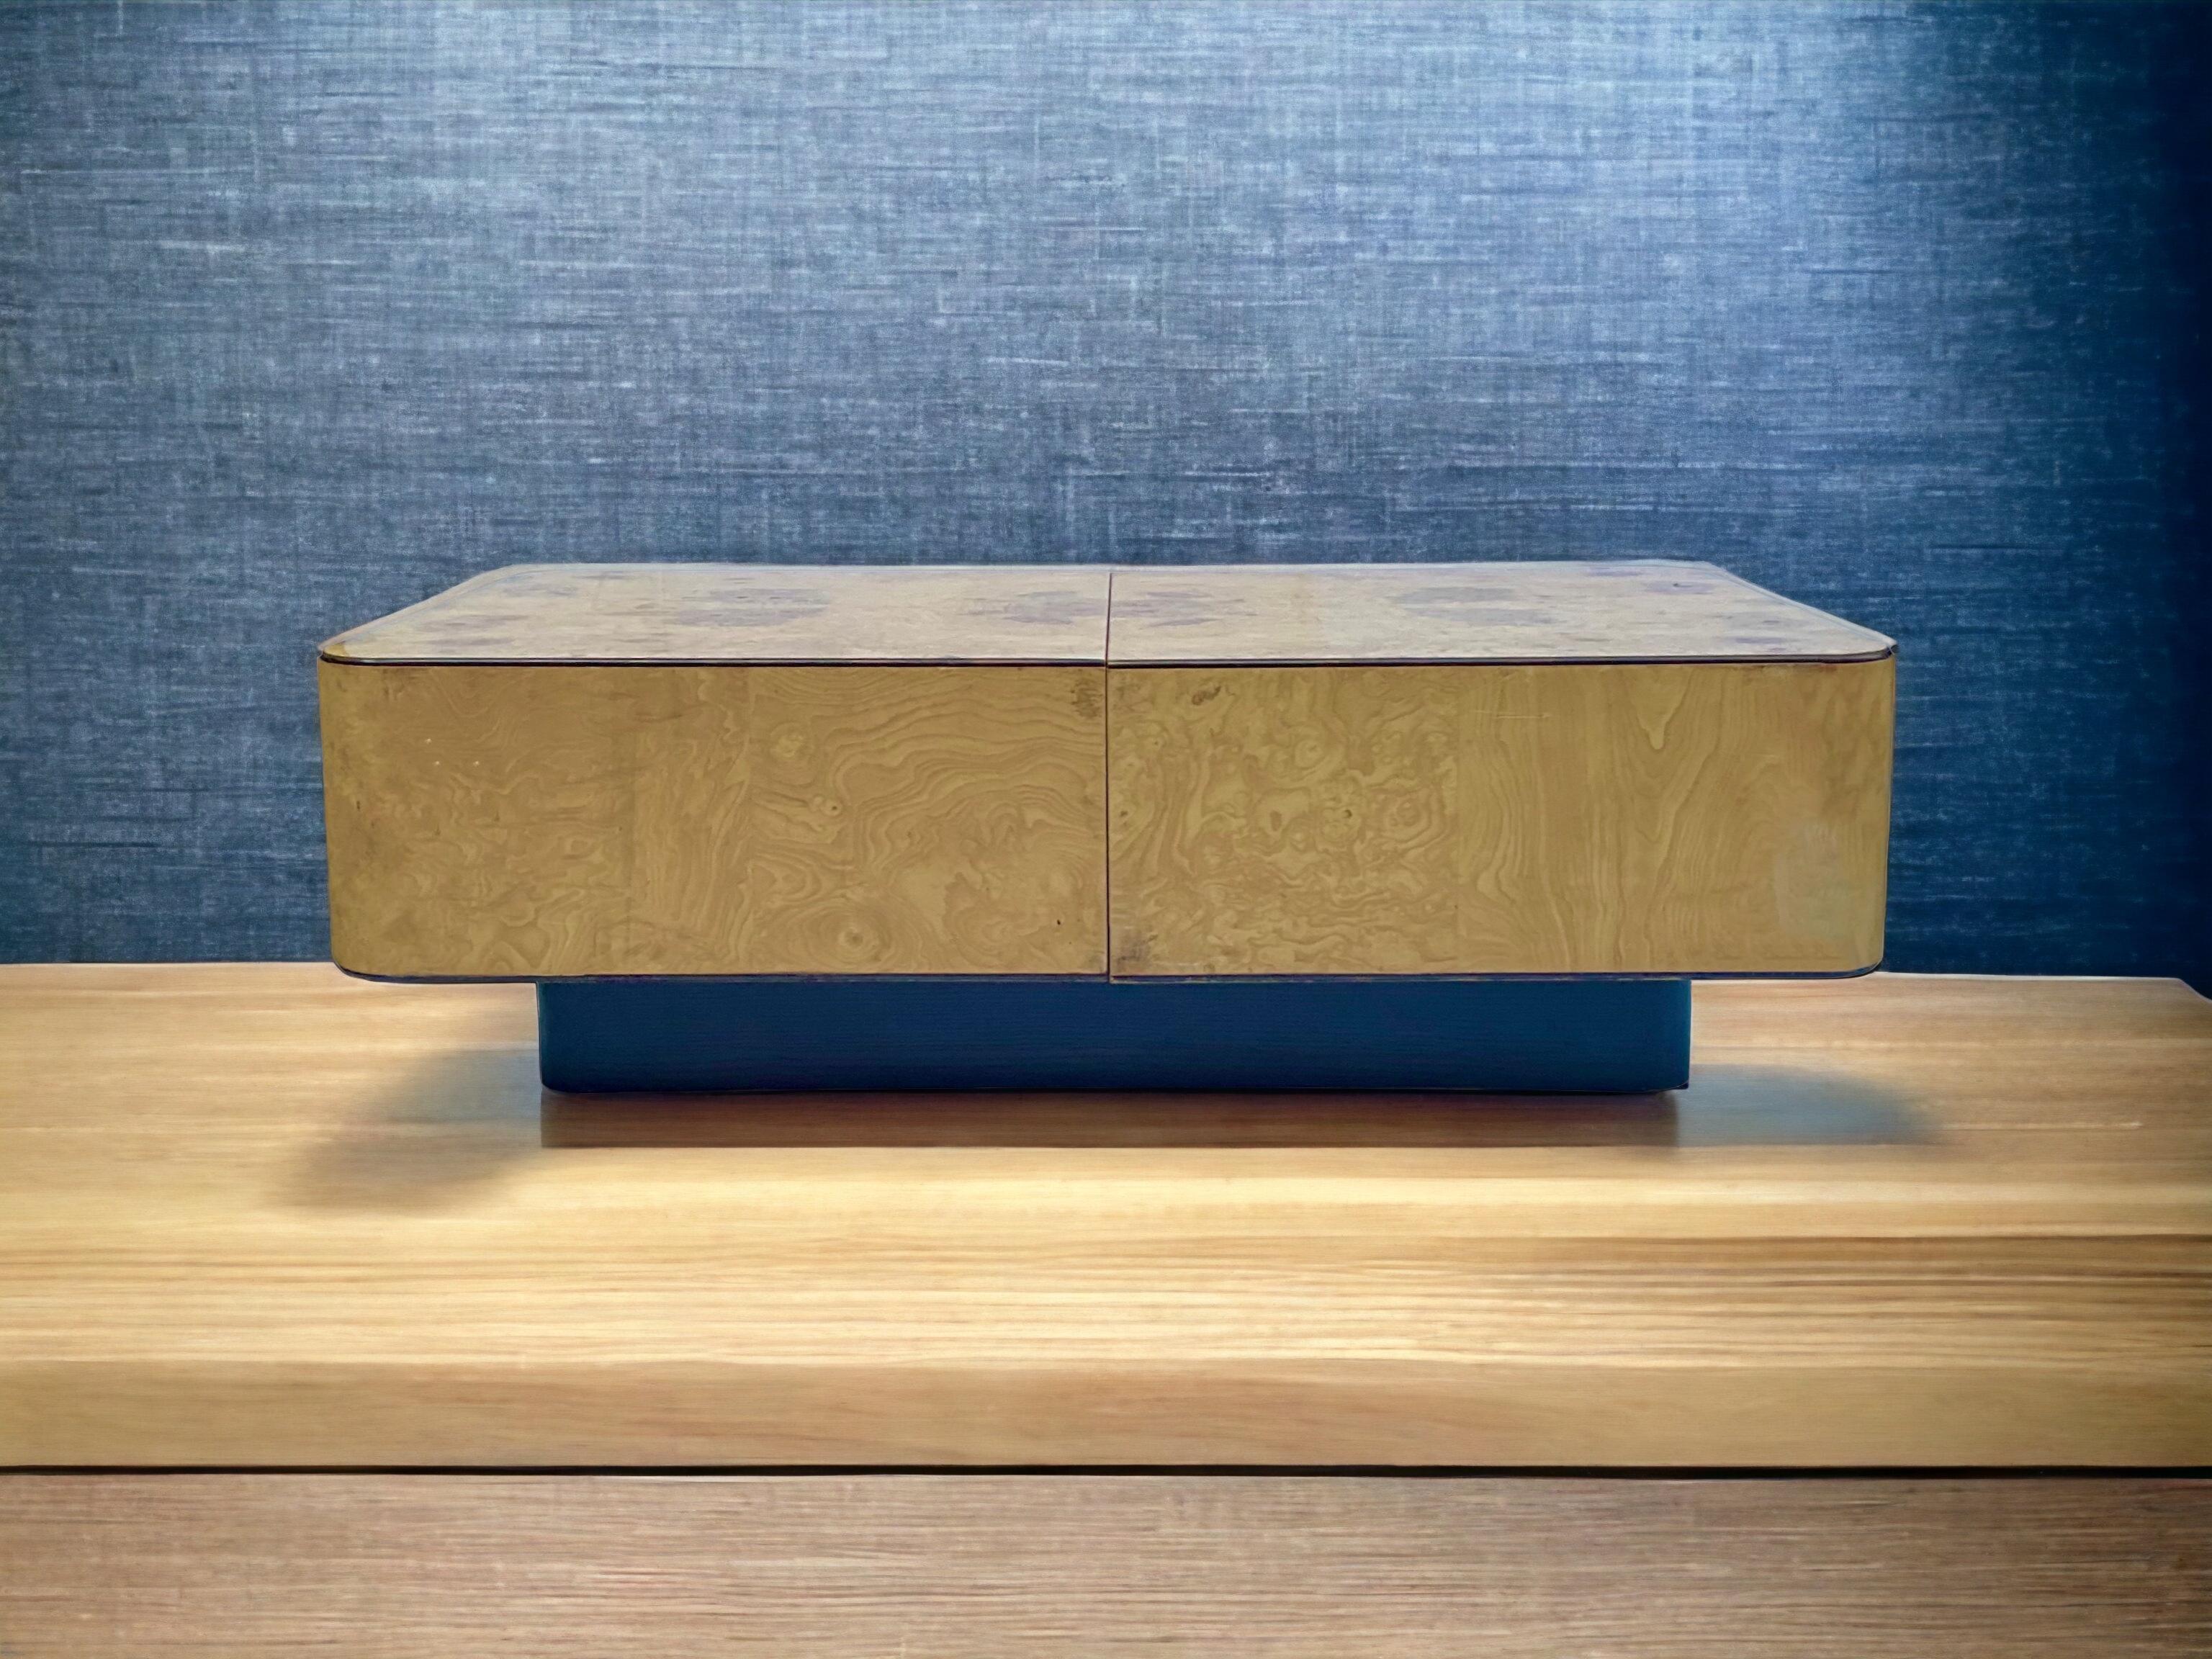 This is a sleek, modern floating burl veneer coffee table in the manner of Milo Baughman. The burl portion slides open easily to reveal storage. The top is on a black rectangular base. It was manufactured by Henredon in the 1970s. It is in very good